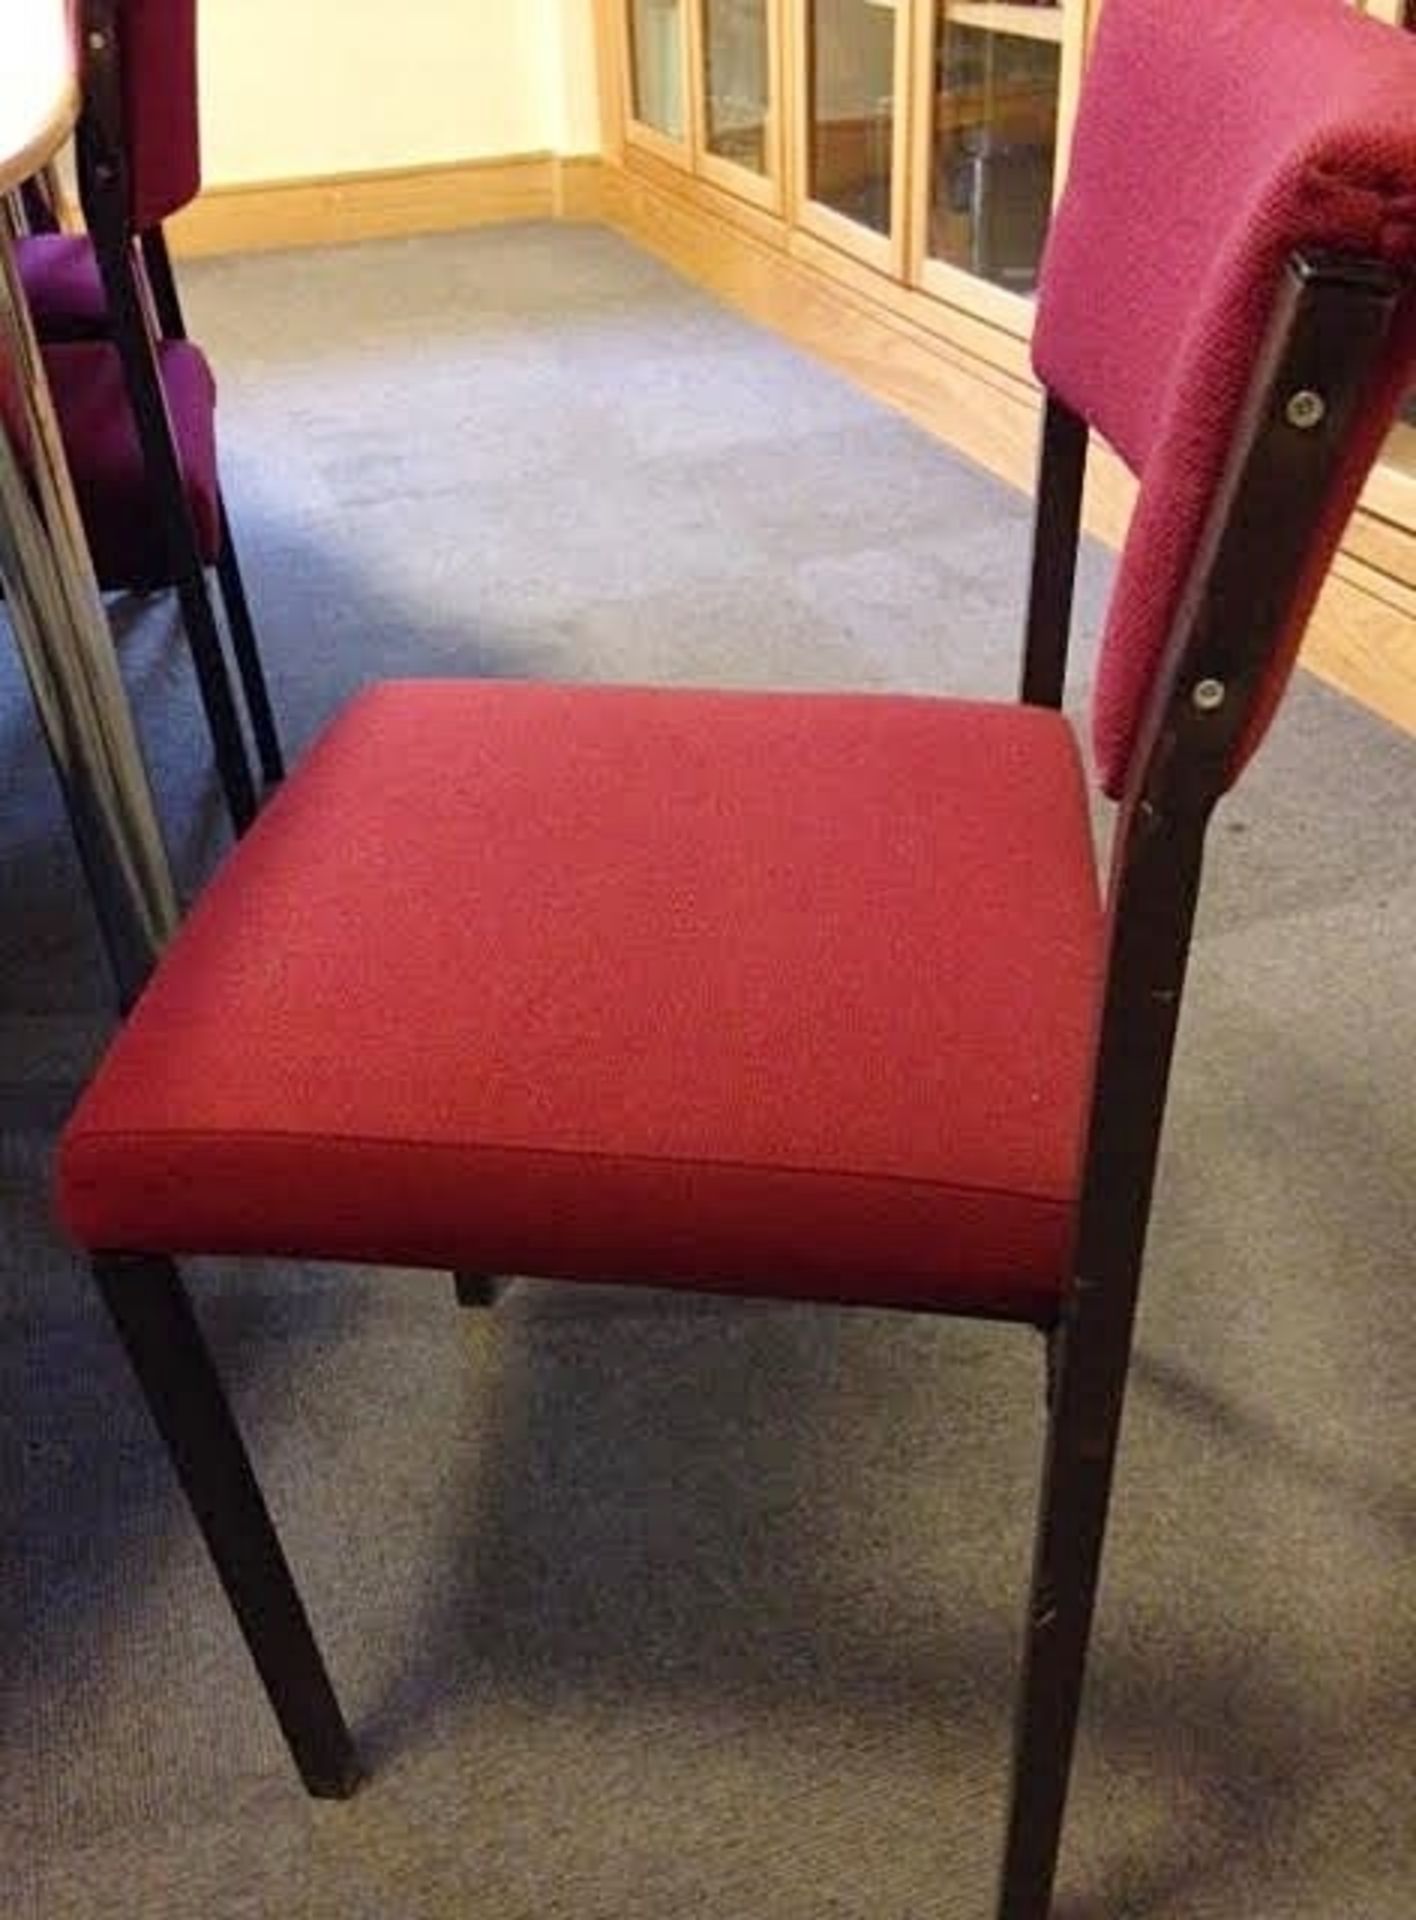 10 x Stacking Chairs - Burgundy Fabric - All In Good Condition - General Purpose Stacking Chairs For - Image 6 of 6